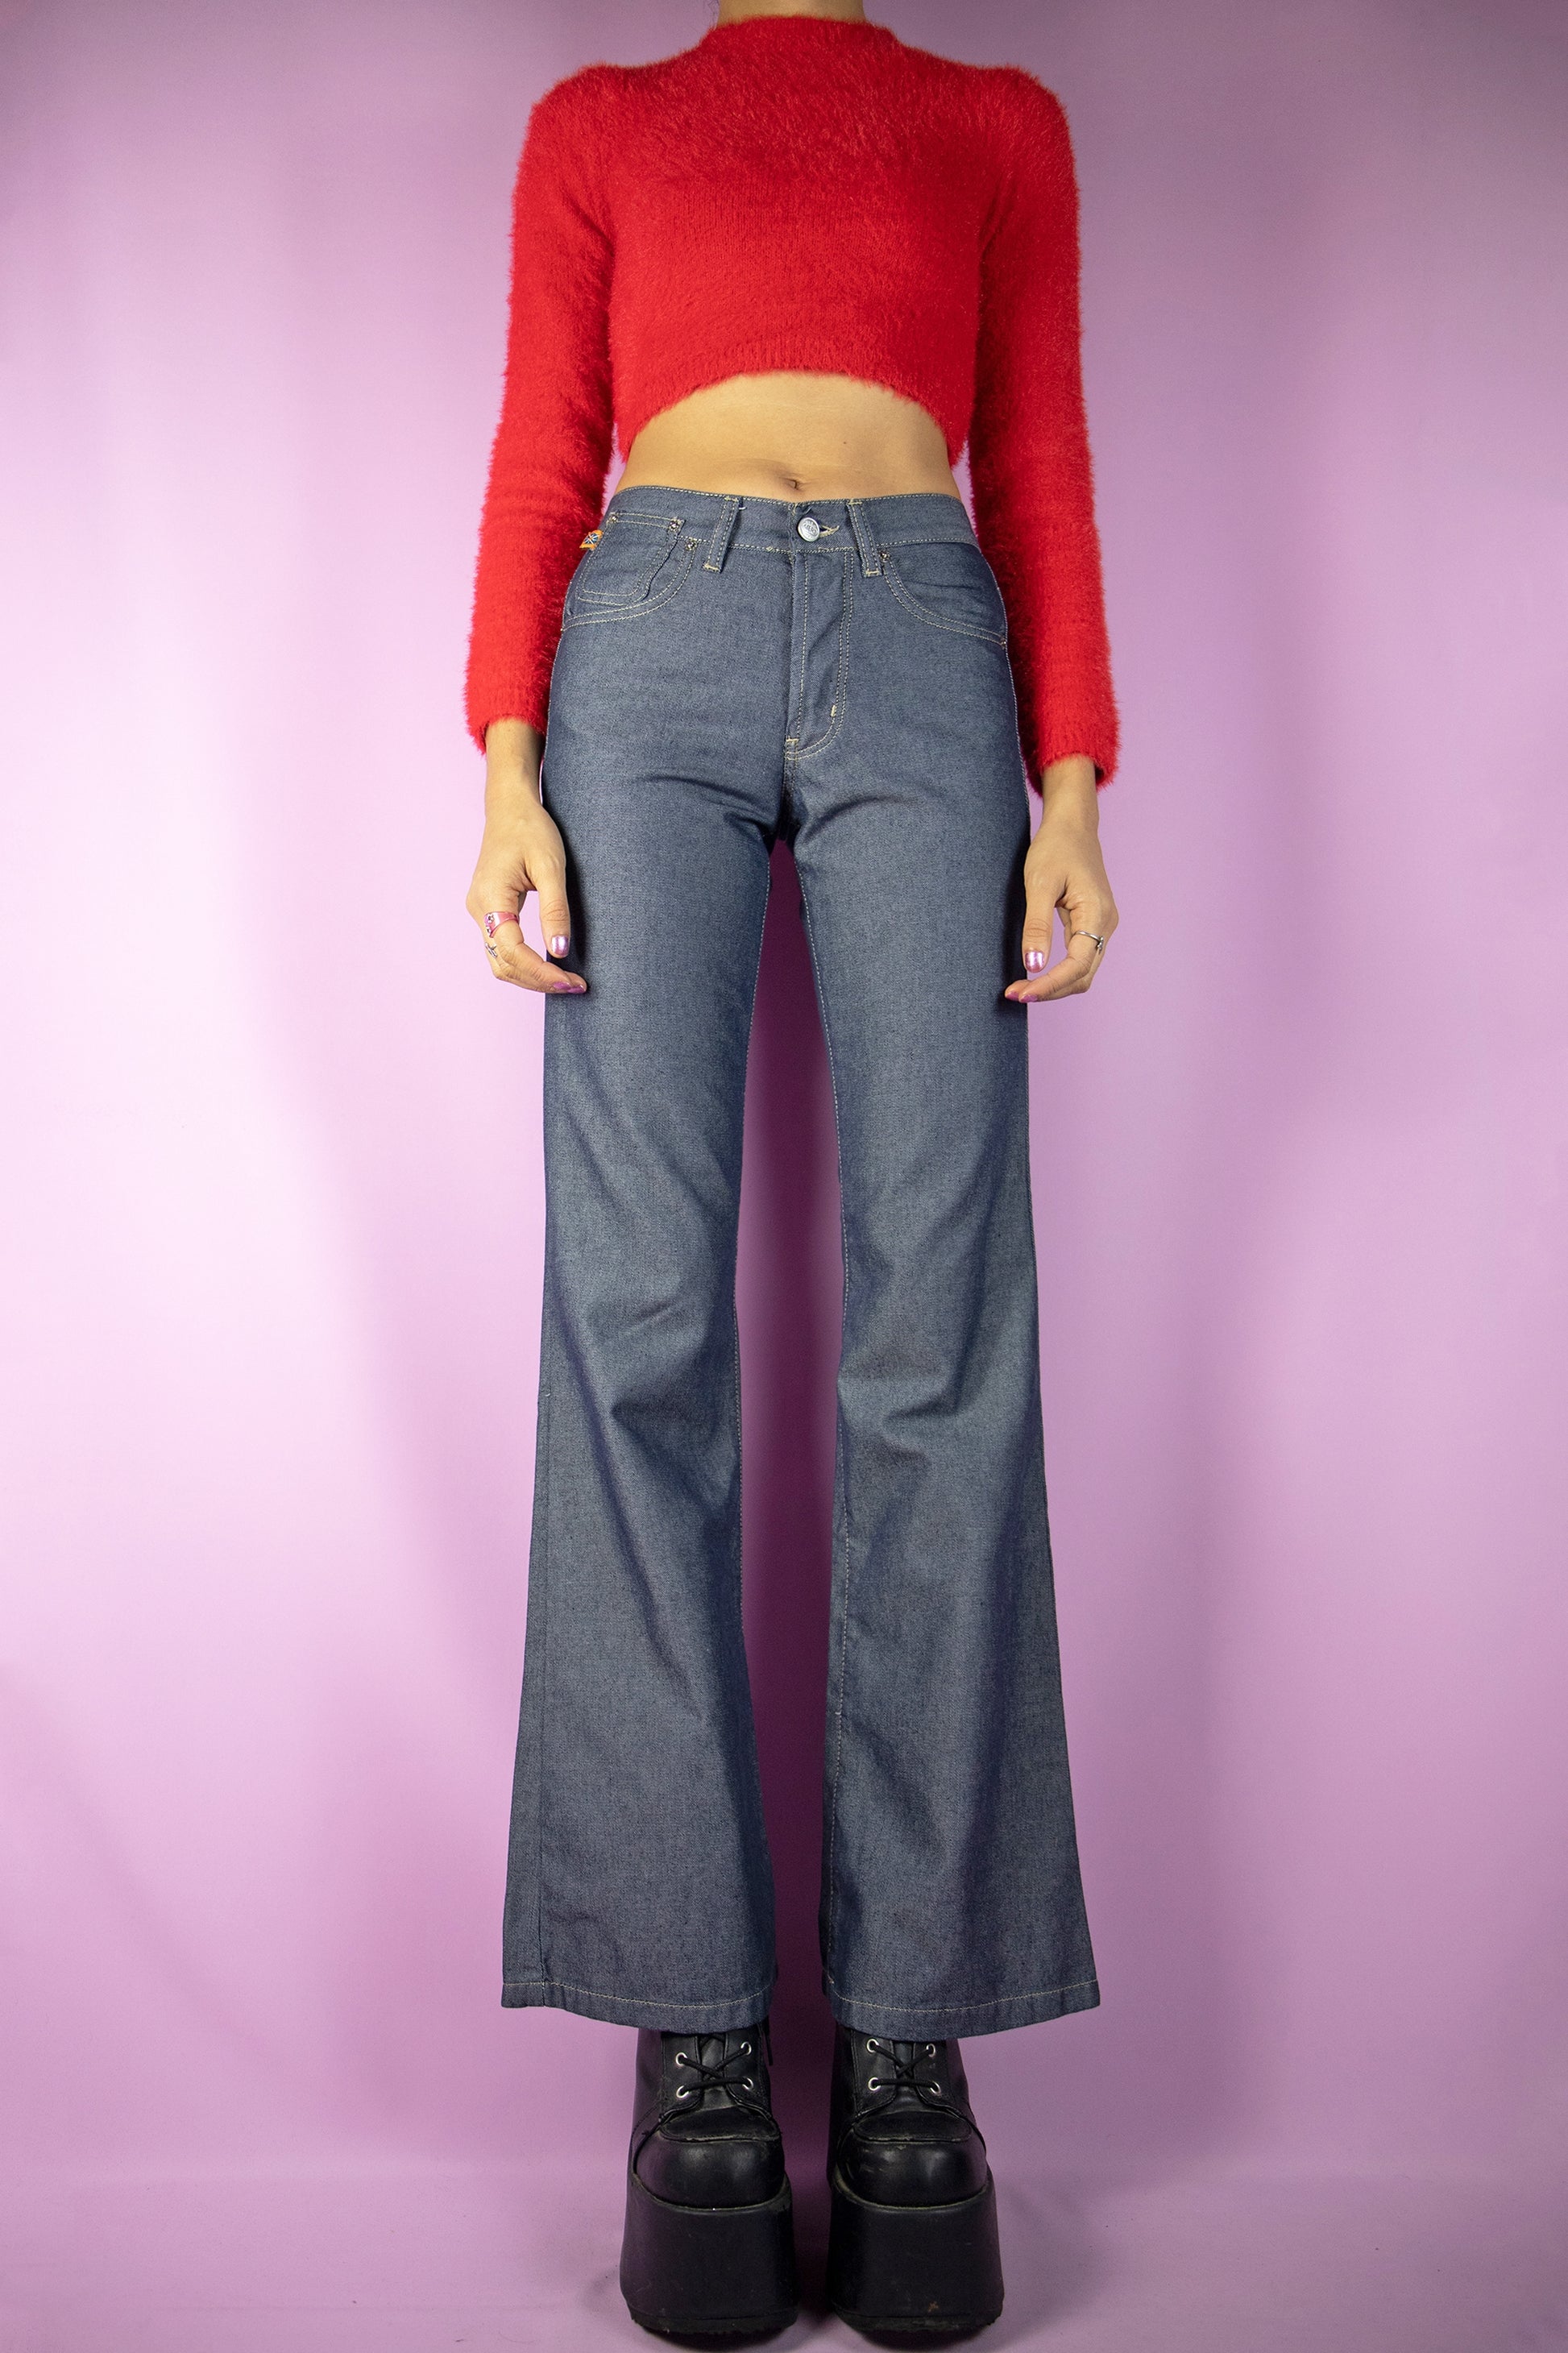 The Y2K Dark Mid Rise Flare Jeans are dark gray-blue mid-rise wide-leg flared pants with button closure and pockets. Super cute cyber grunge 2000s denim trousers.